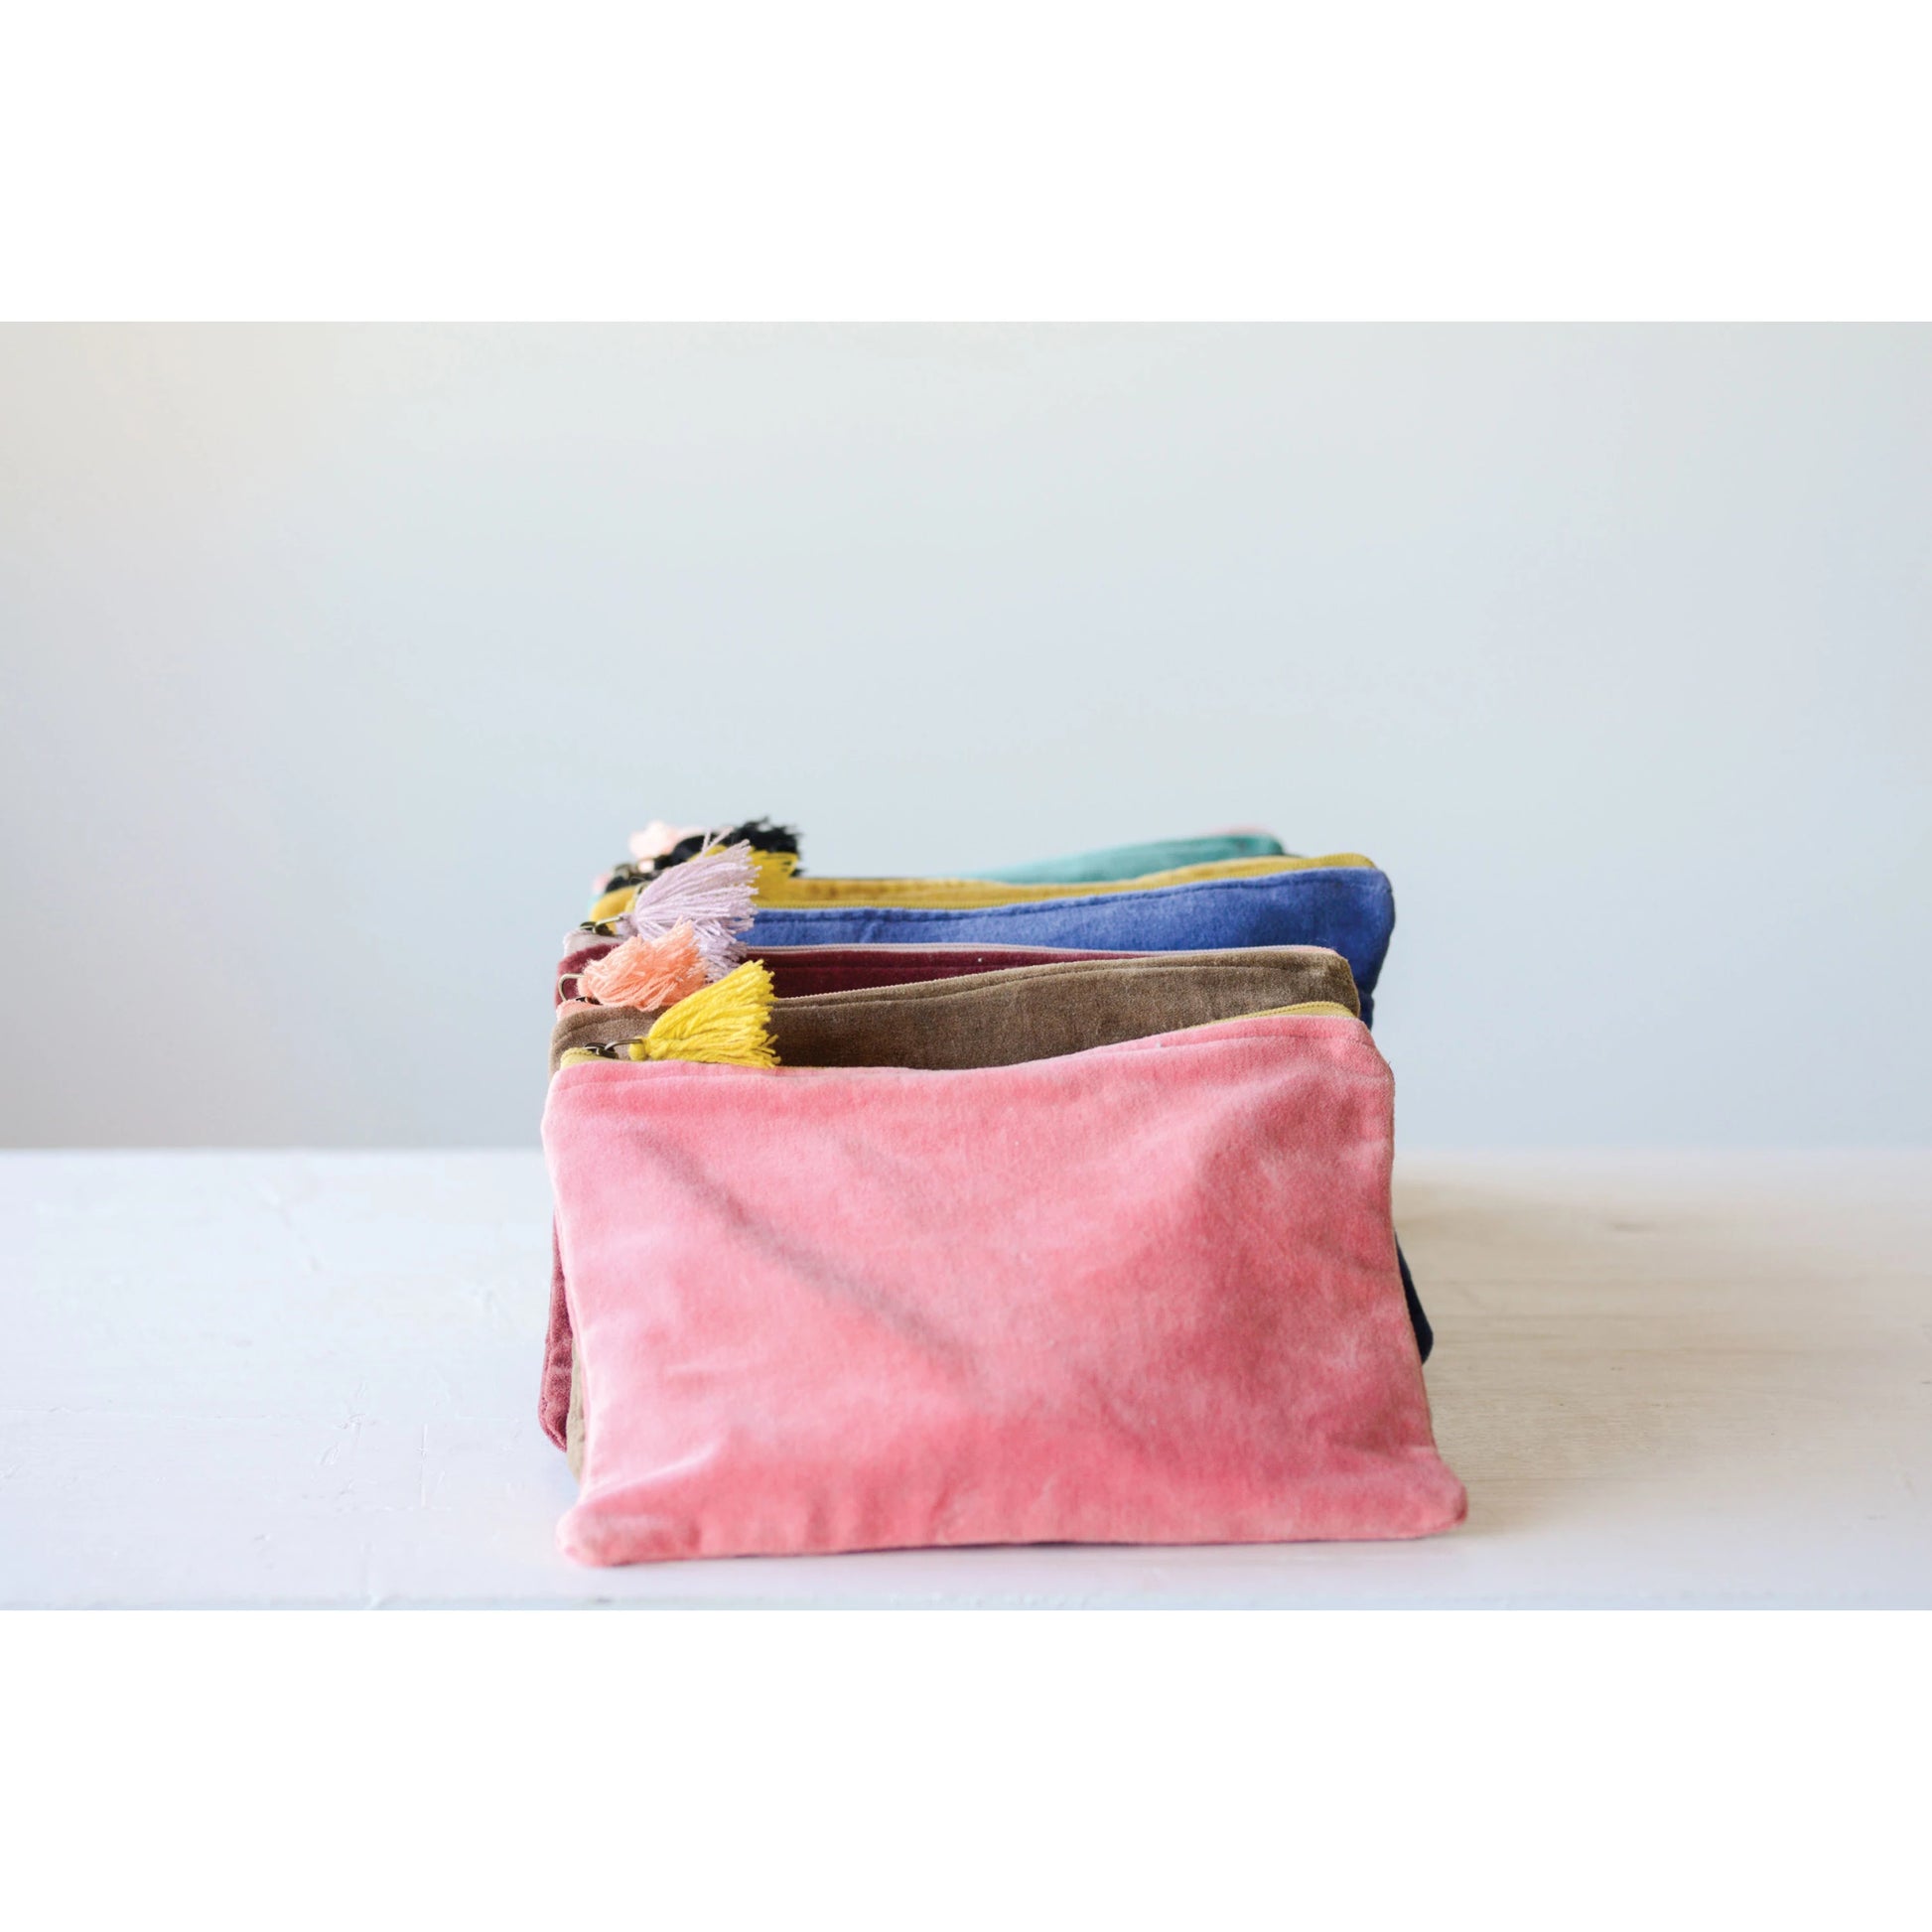 all six colors of velvet zip pouch with tassels displayed rowed up on a white background